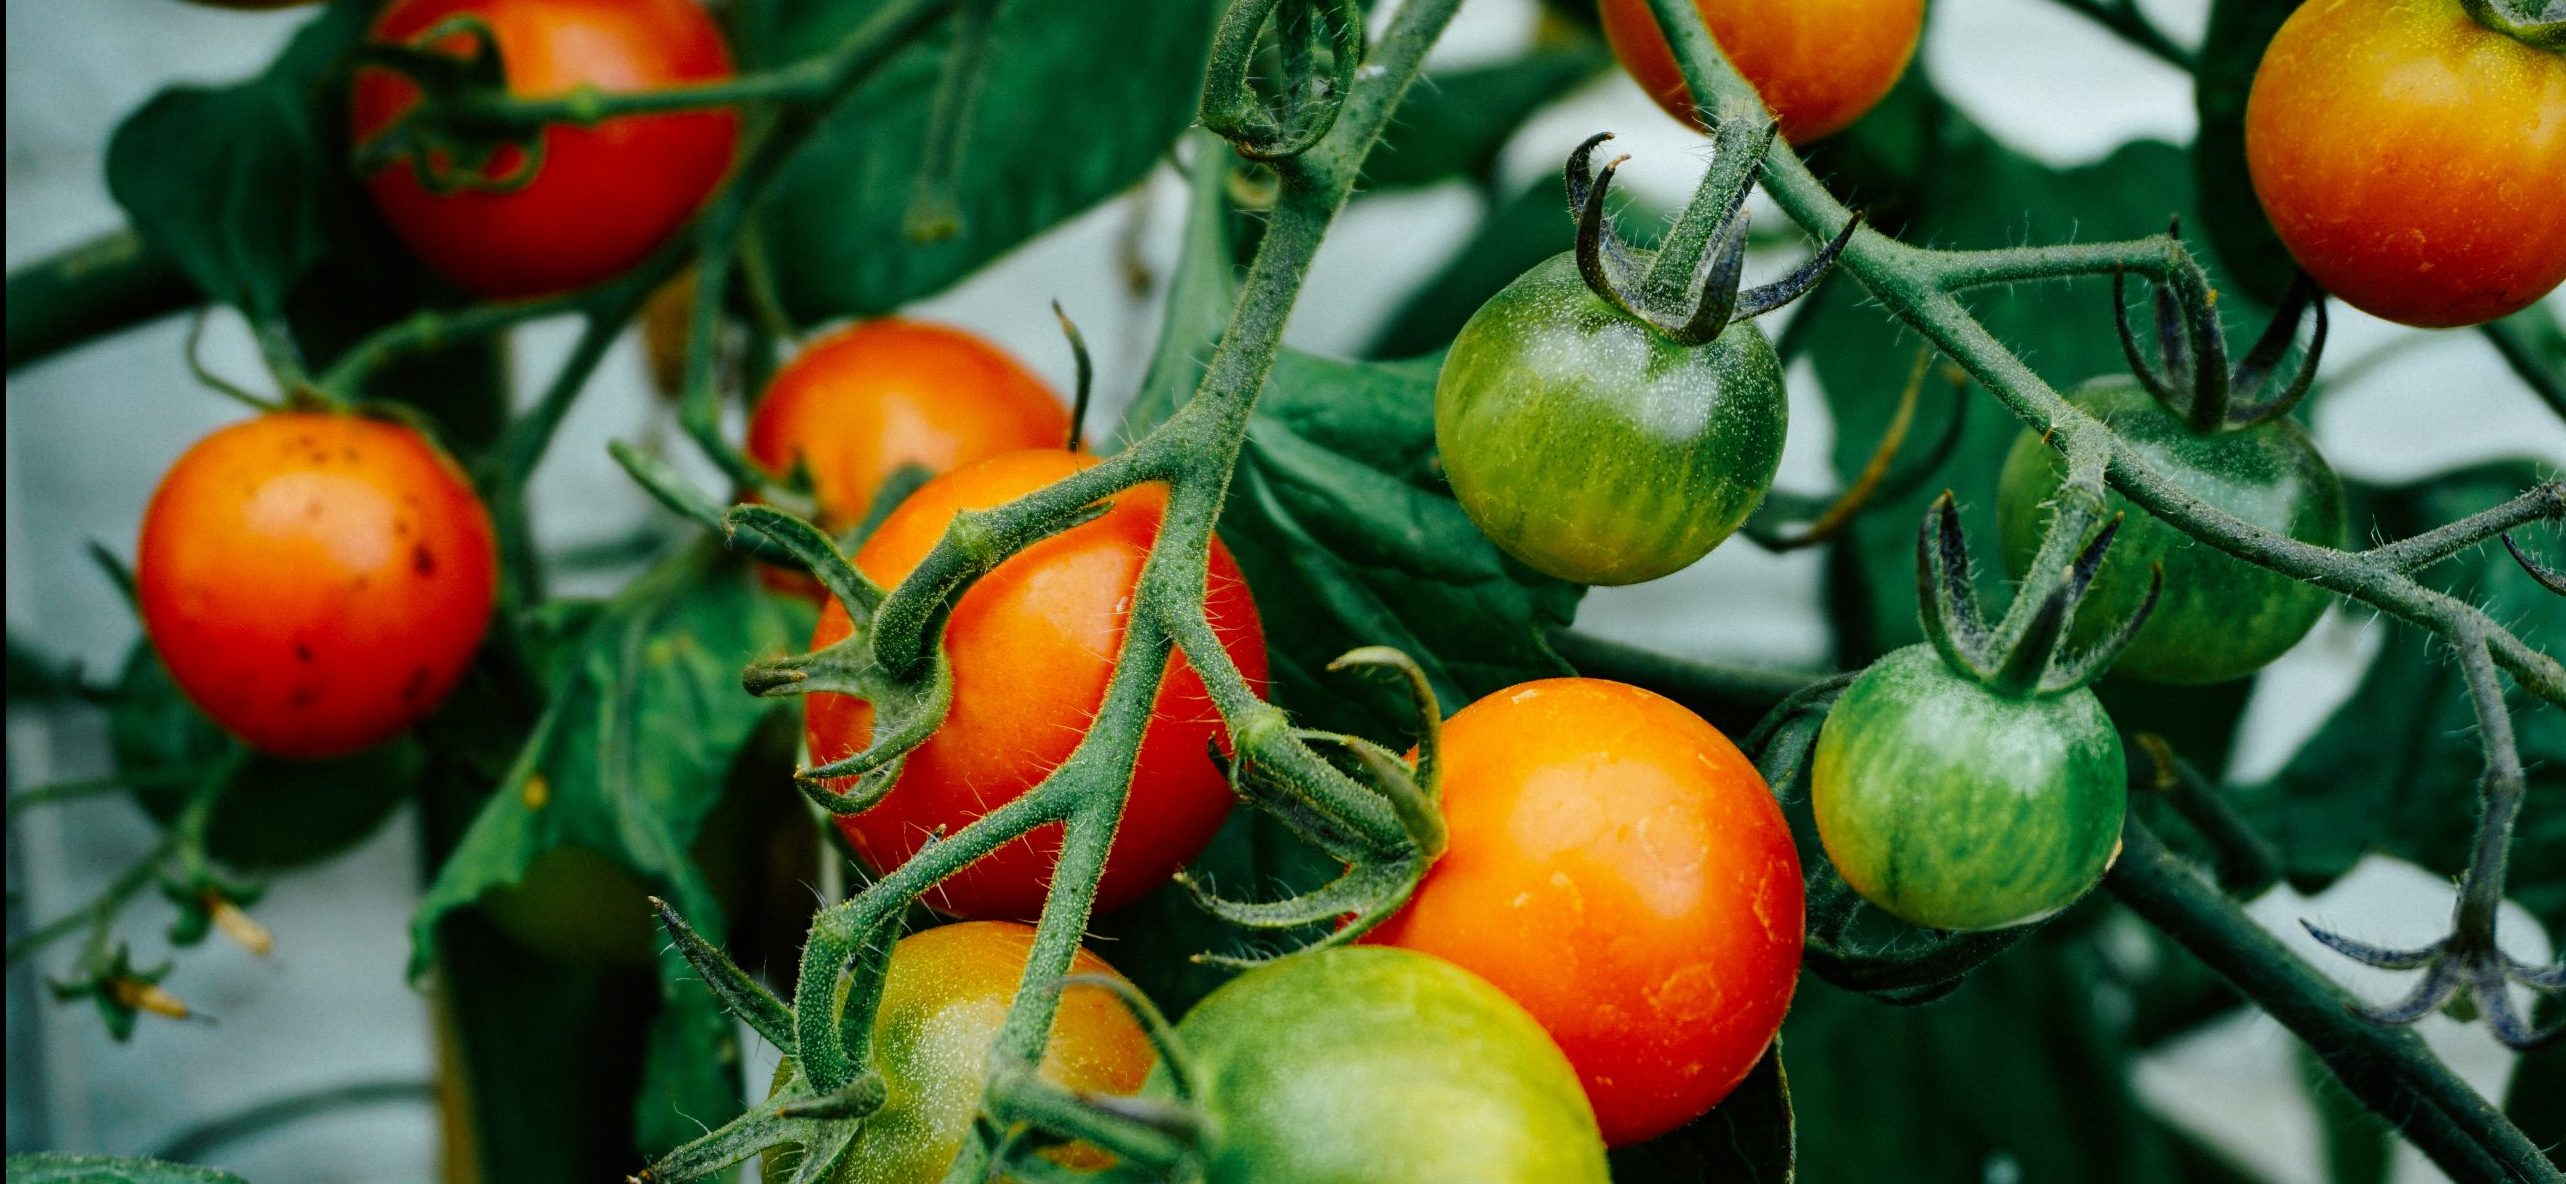 A tomato plant with several red and green tomatoes